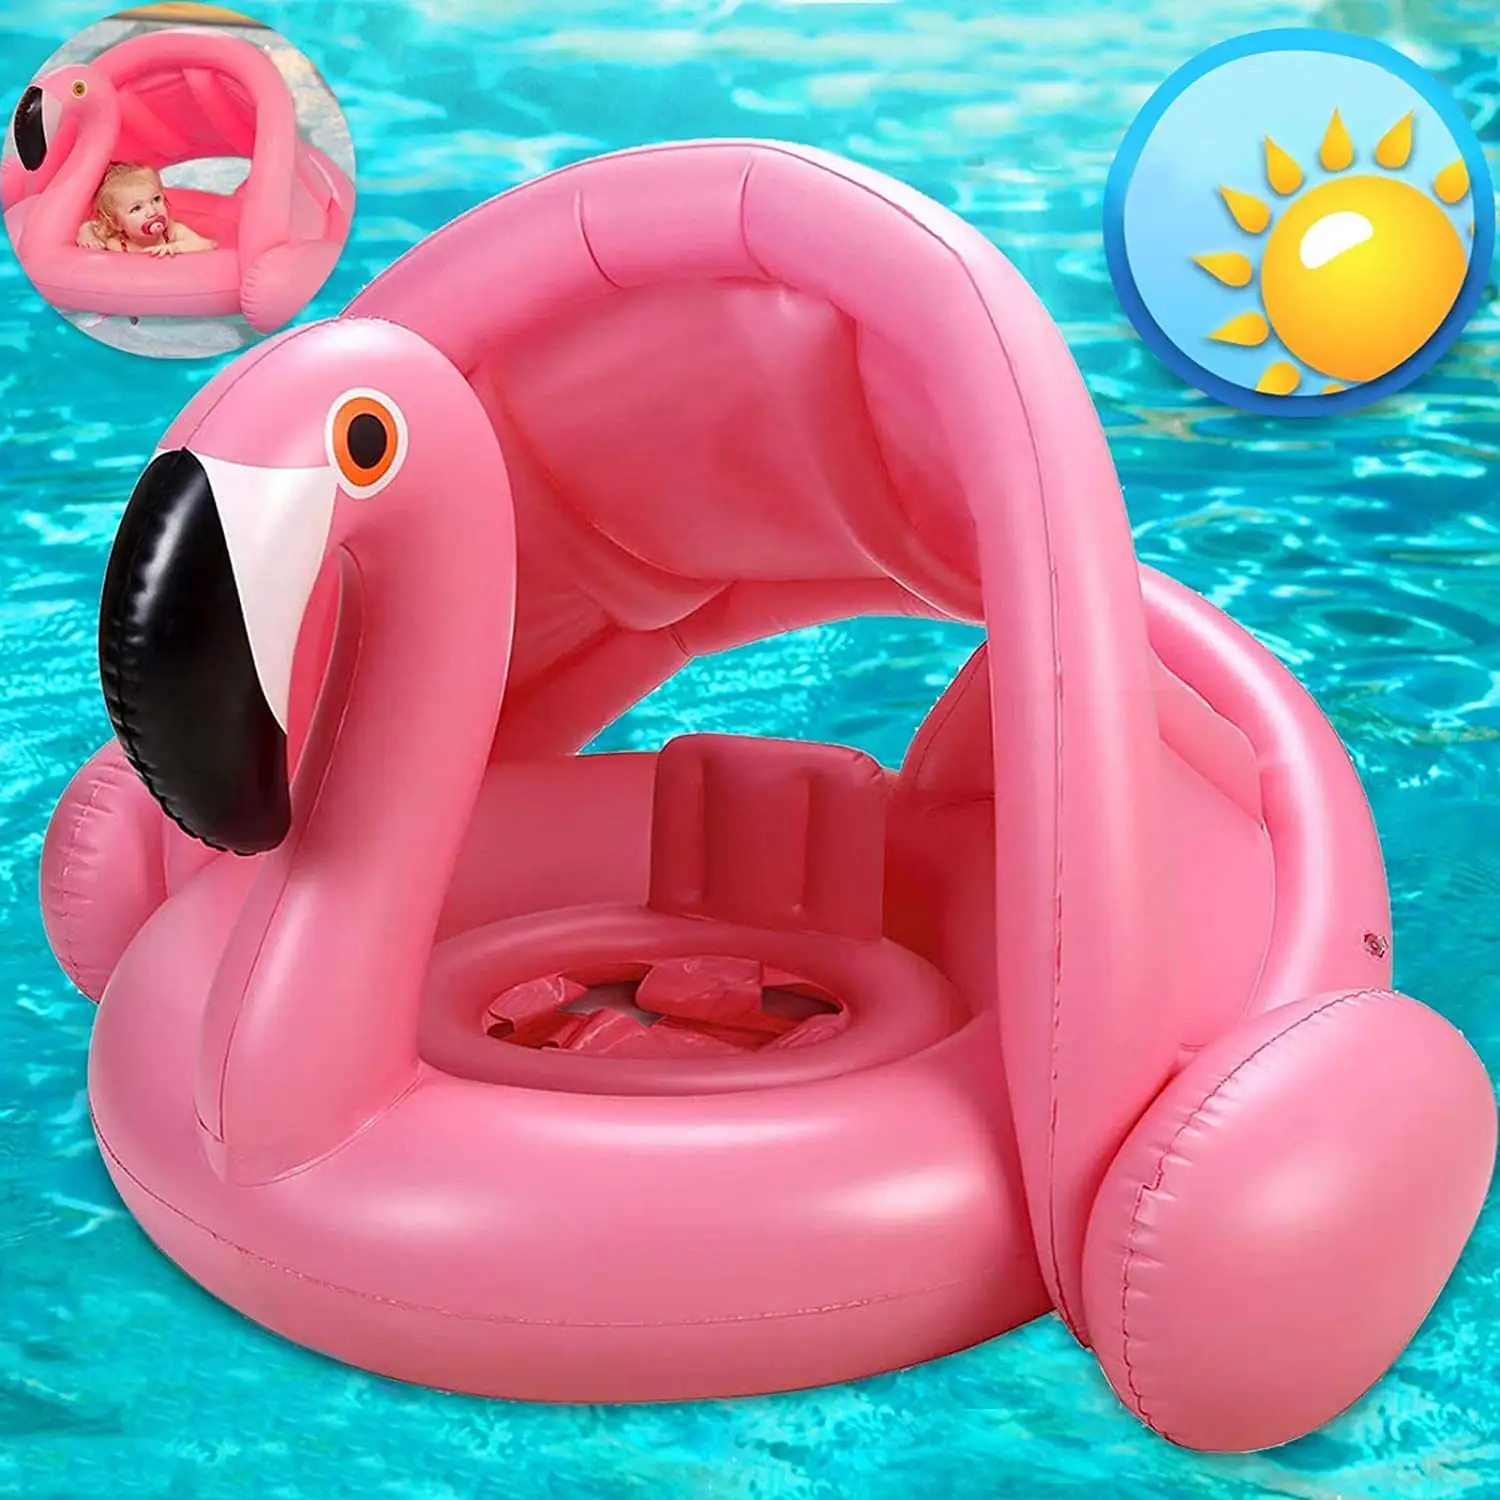 Flamingo Baby Swim Ring Inflatable Pool Float Sunshade for Infant Kids Boys Girls Toddlers Summer Outdoor Beach Water Toys